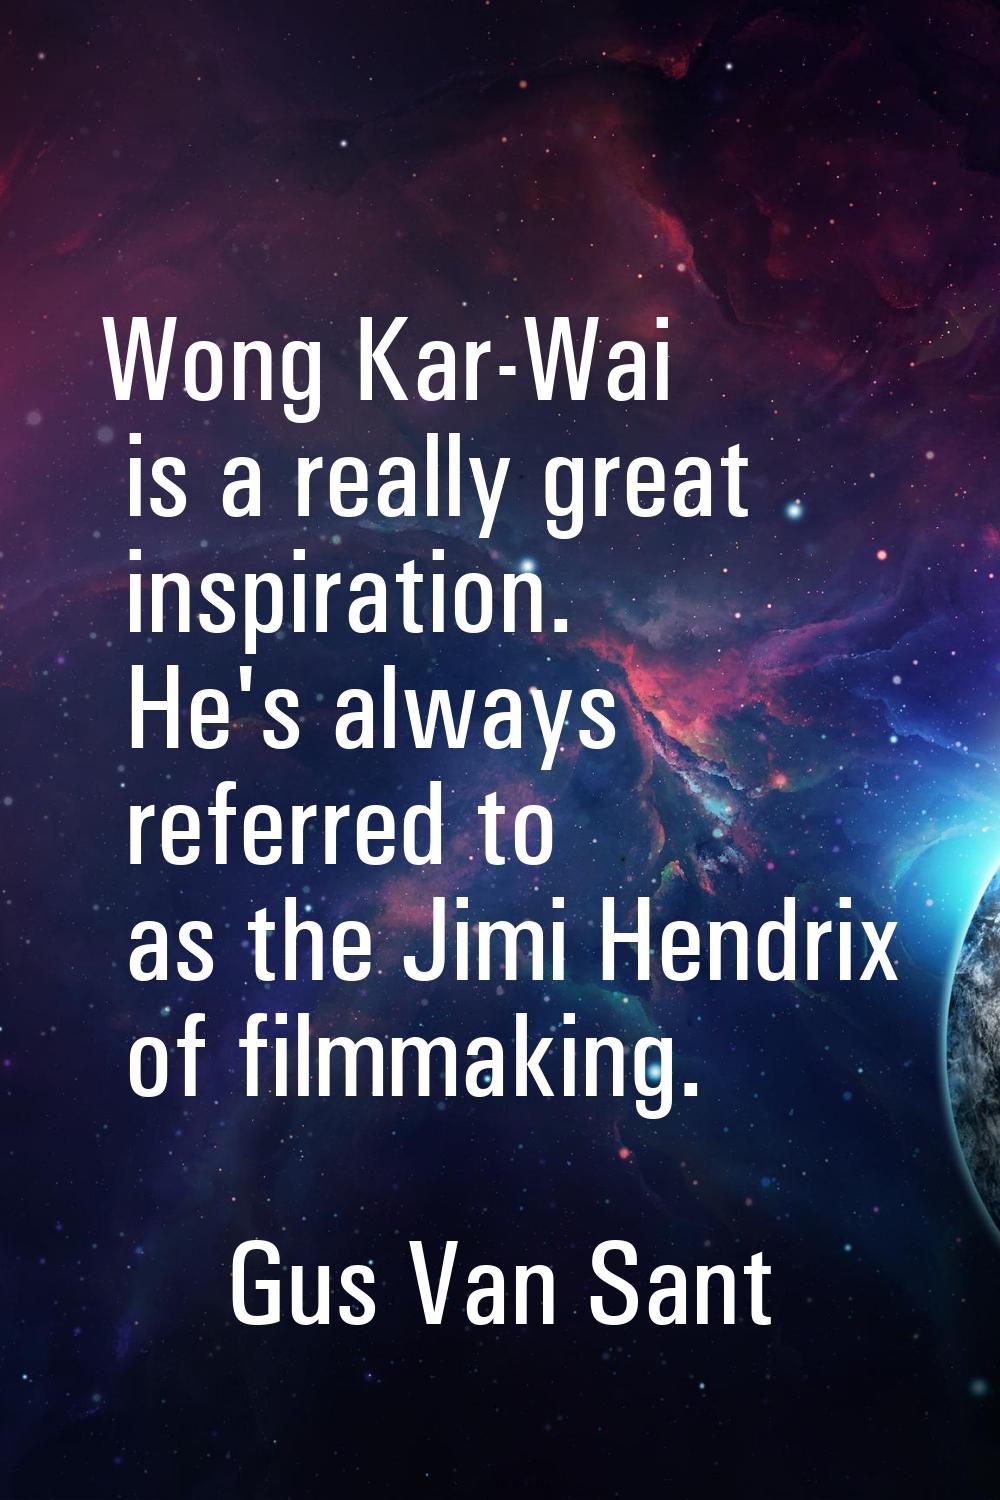 Wong Kar-Wai is a really great inspiration. He's always referred to as the Jimi Hendrix of filmmaki